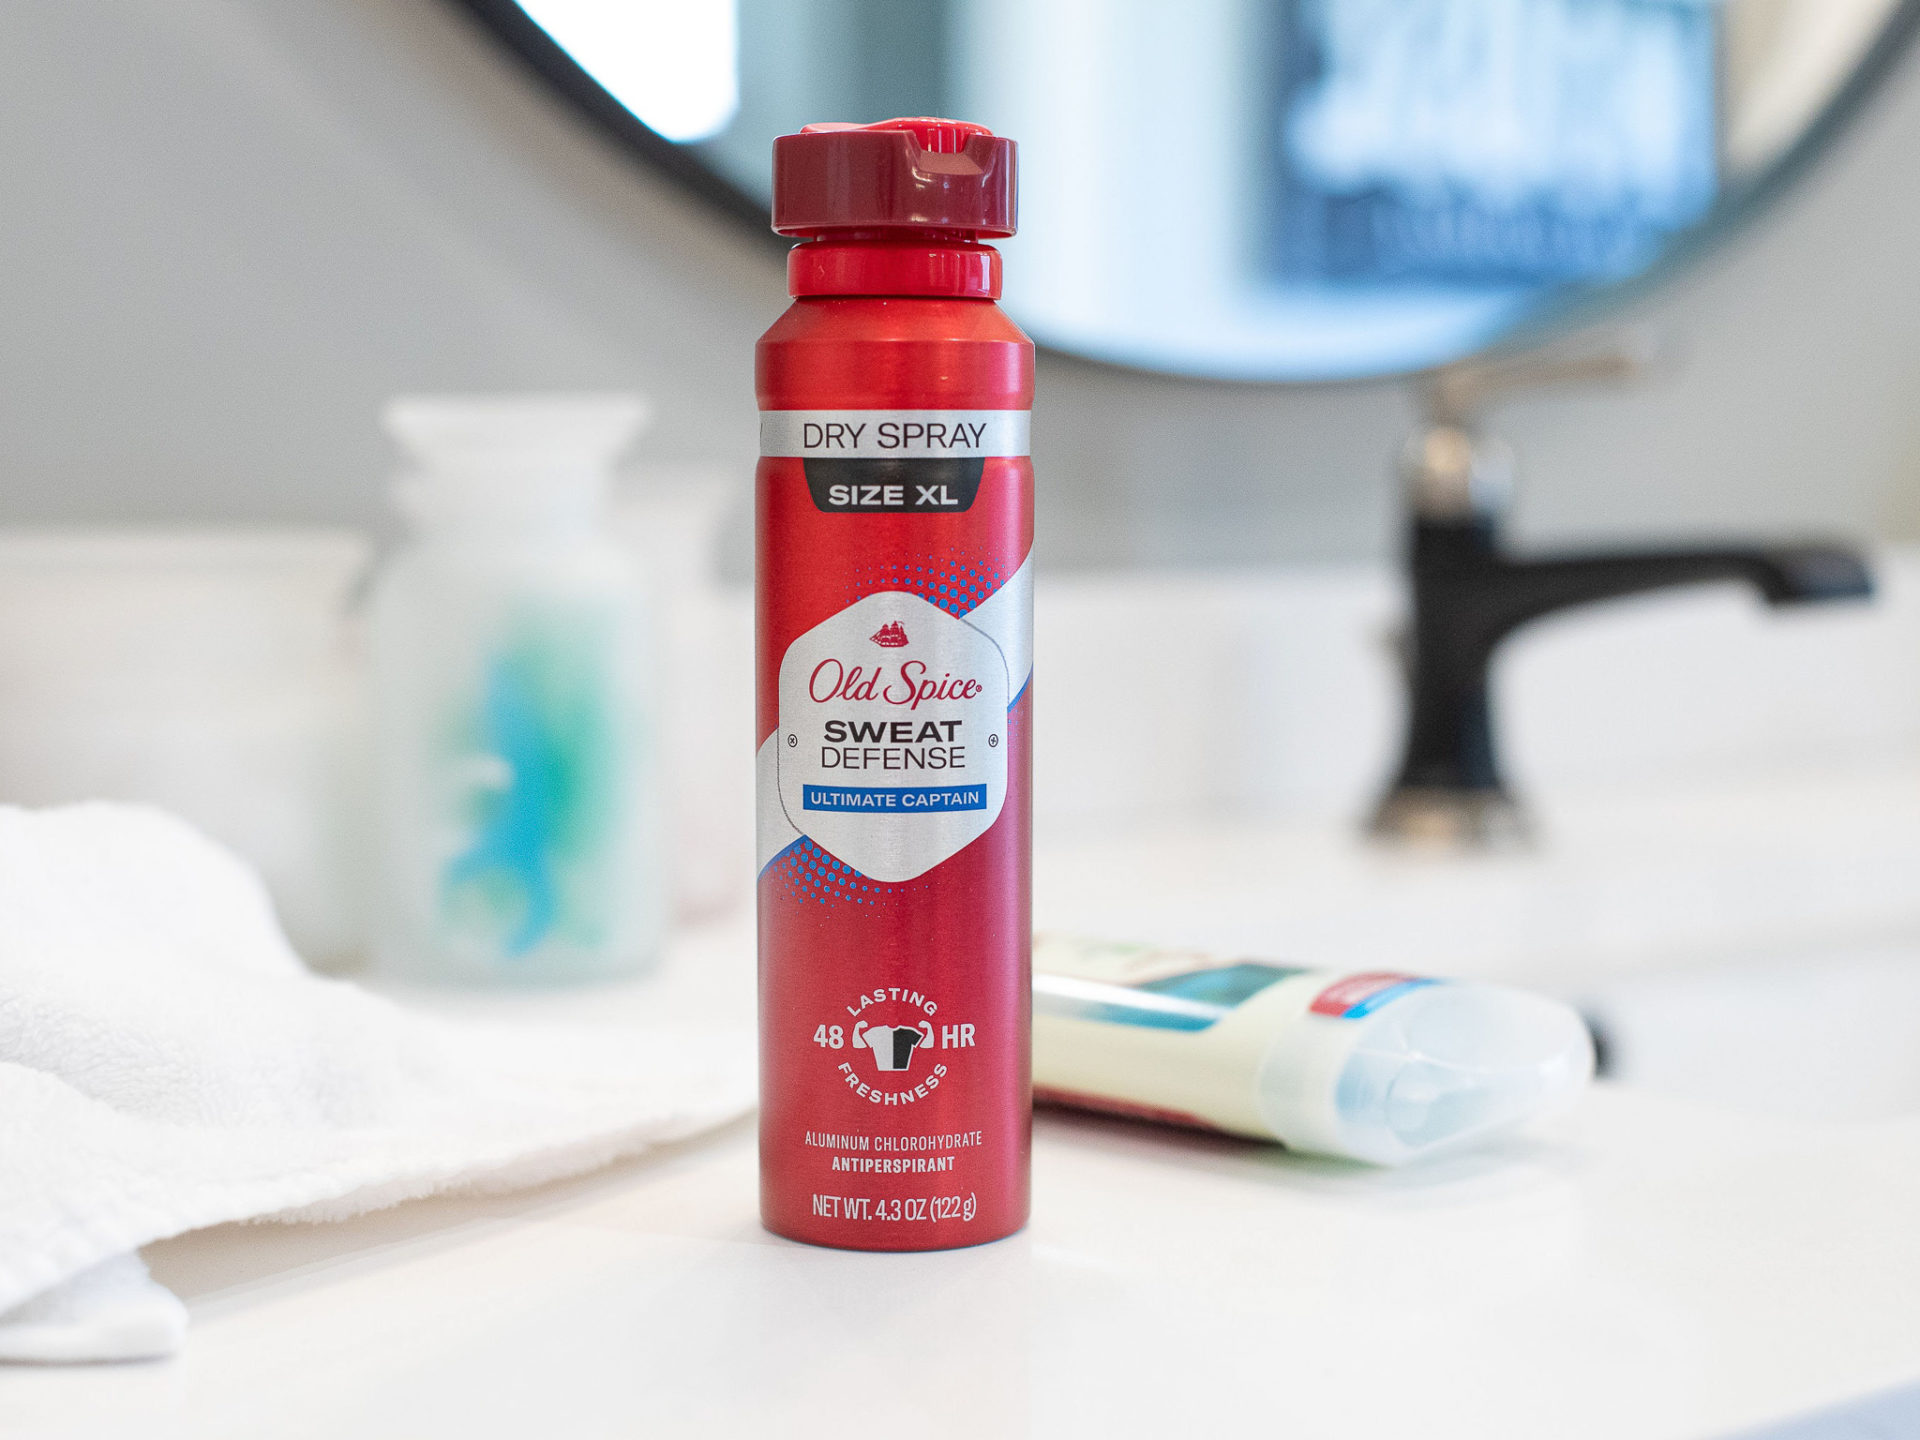 Old Spice Body Spray or Dry Spray As Low As $4.99 At Kroger (Regular Price $9.49)